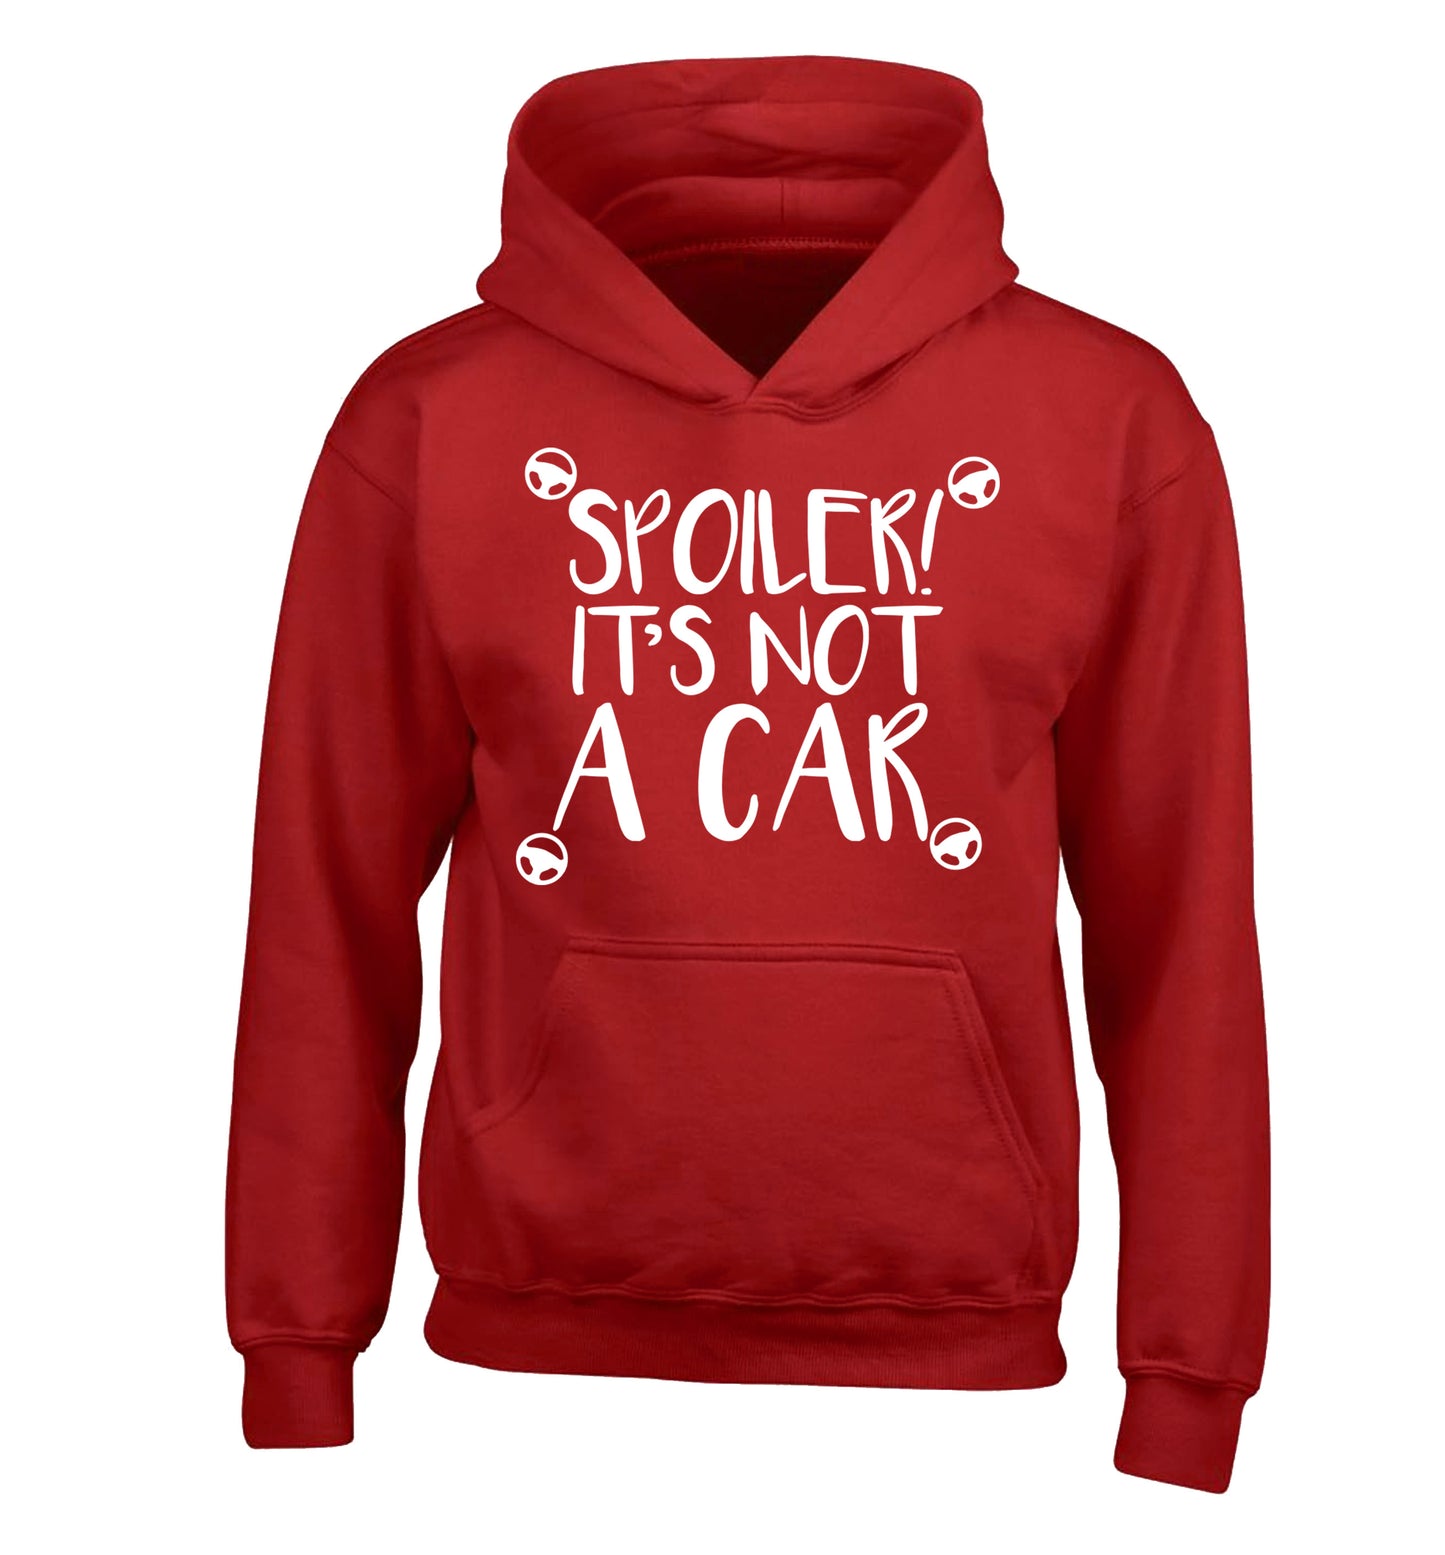 Spoiler it's not a car children's red hoodie 12-13 Years